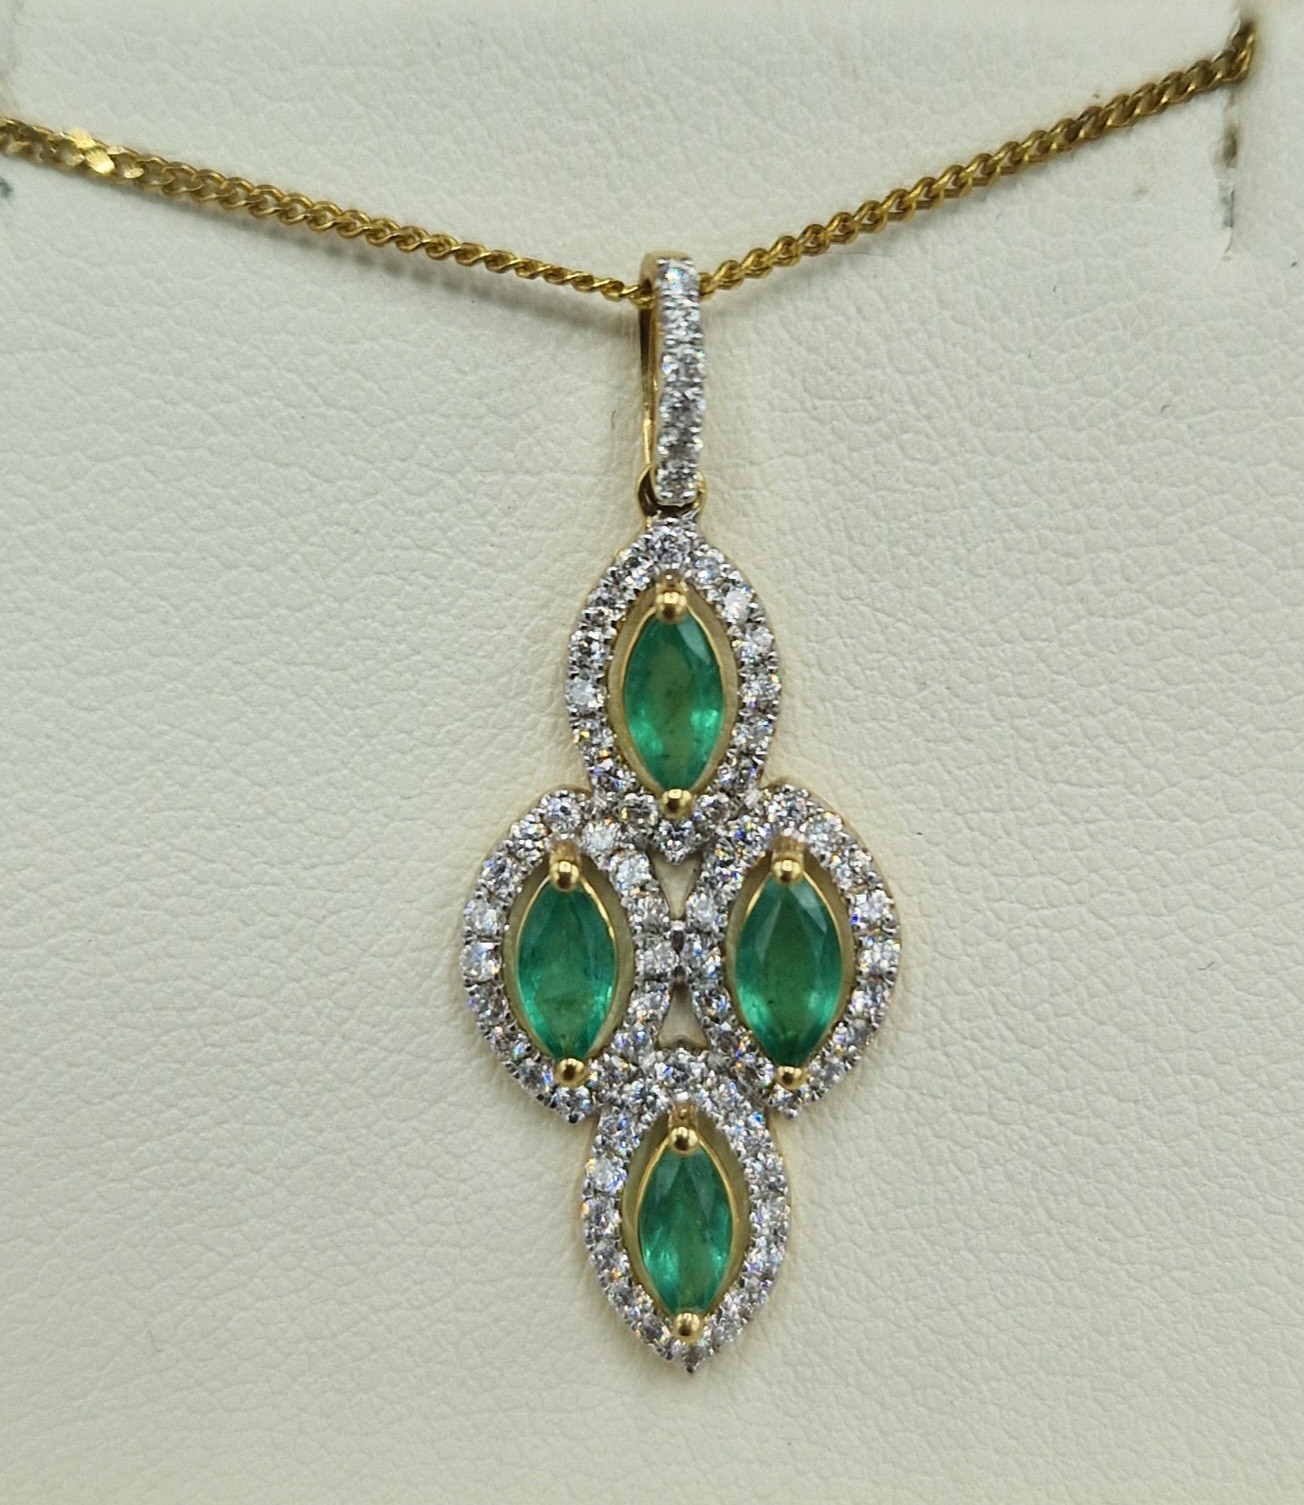 An 18ct gold pendant set with four emeralds surrounded by diamonds with a 925 silver chain, 32mm